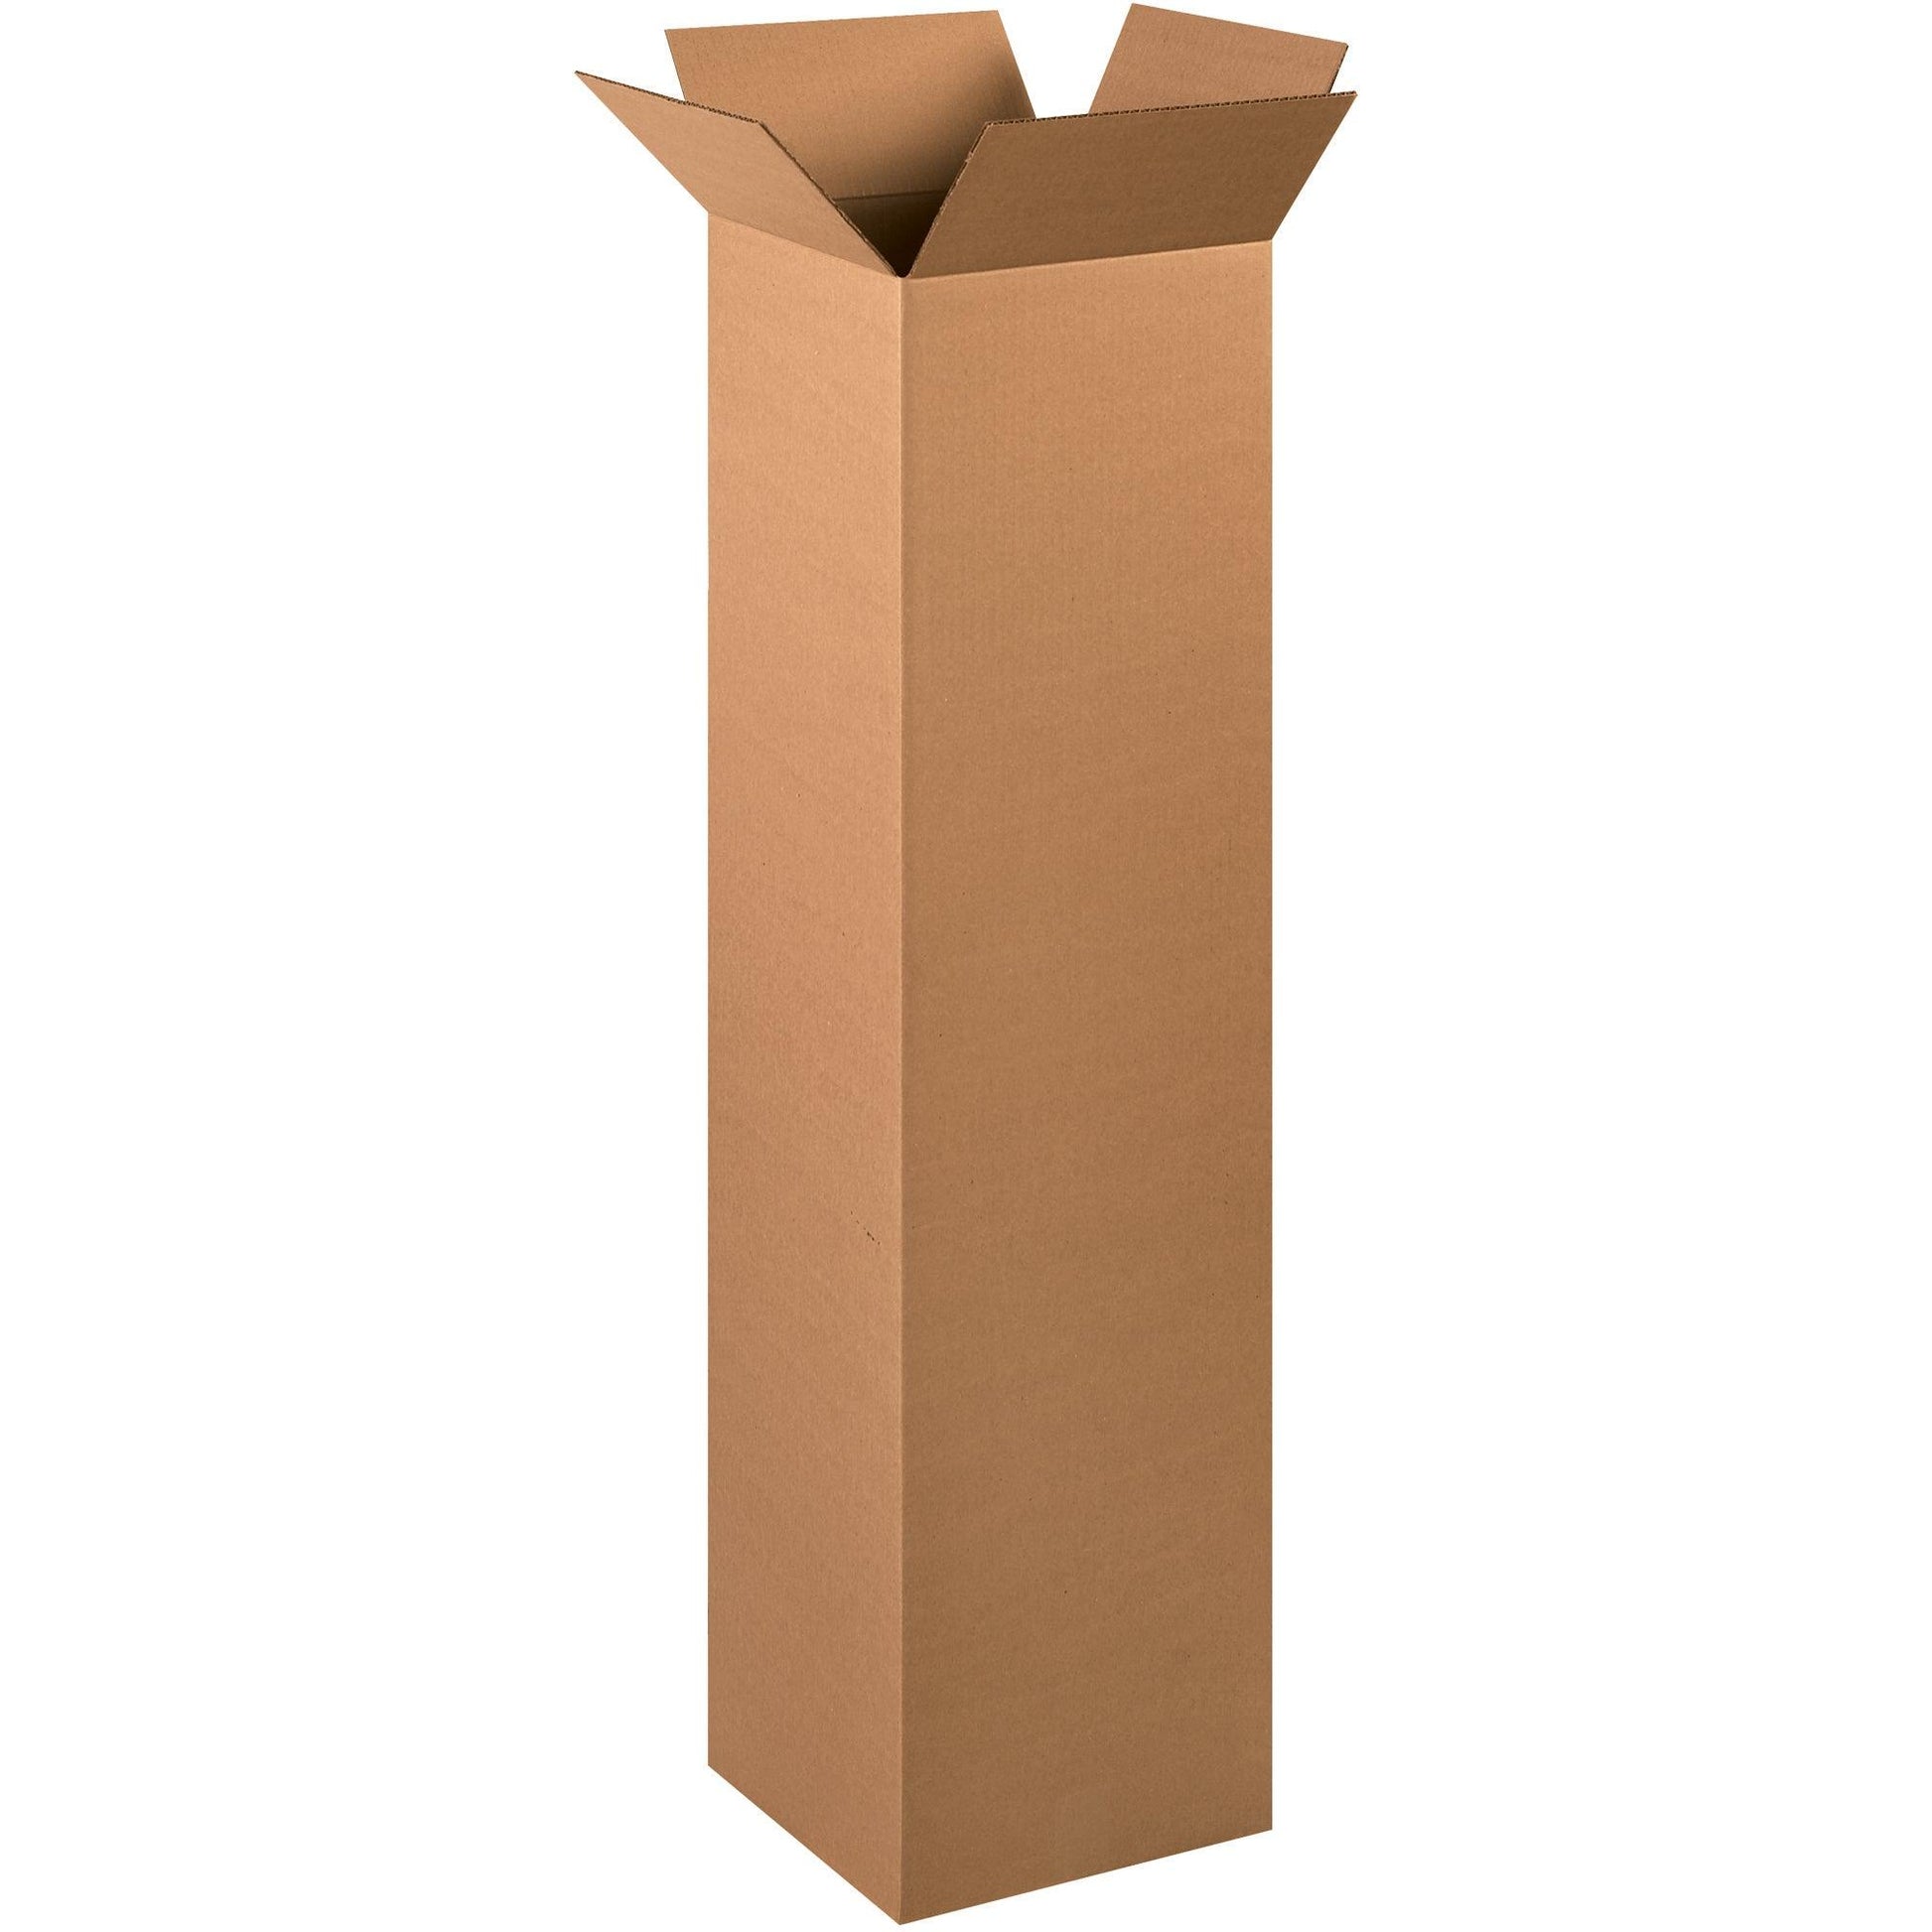 12 x 12 x 48" Tall Corrugated Boxes - 121248